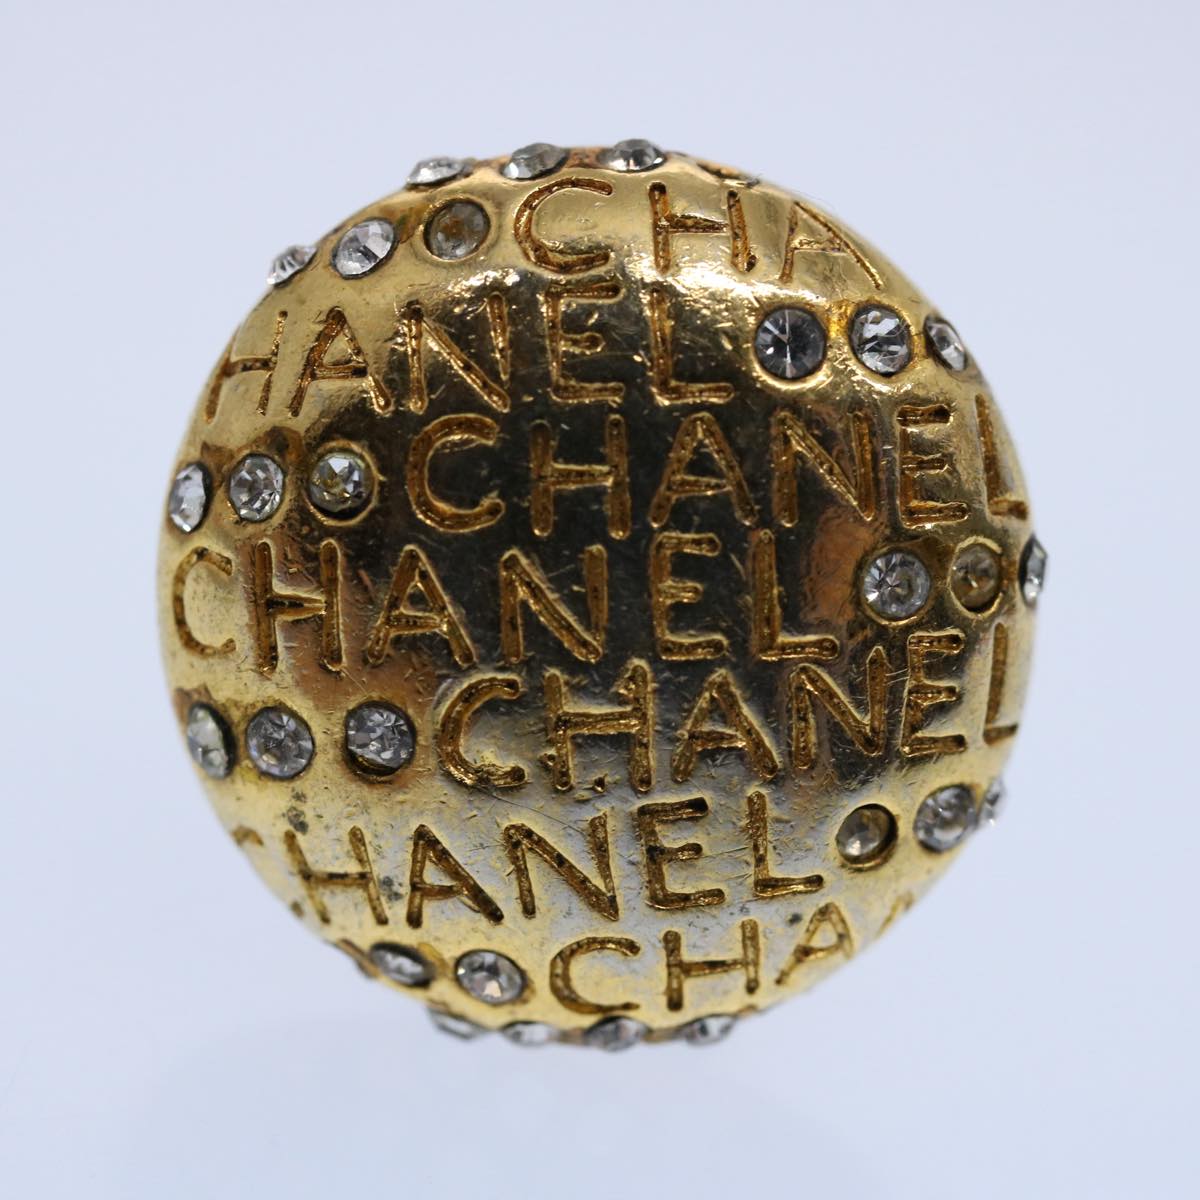 CHANEL Earring Metal Gold Tone CC Auth bs10315